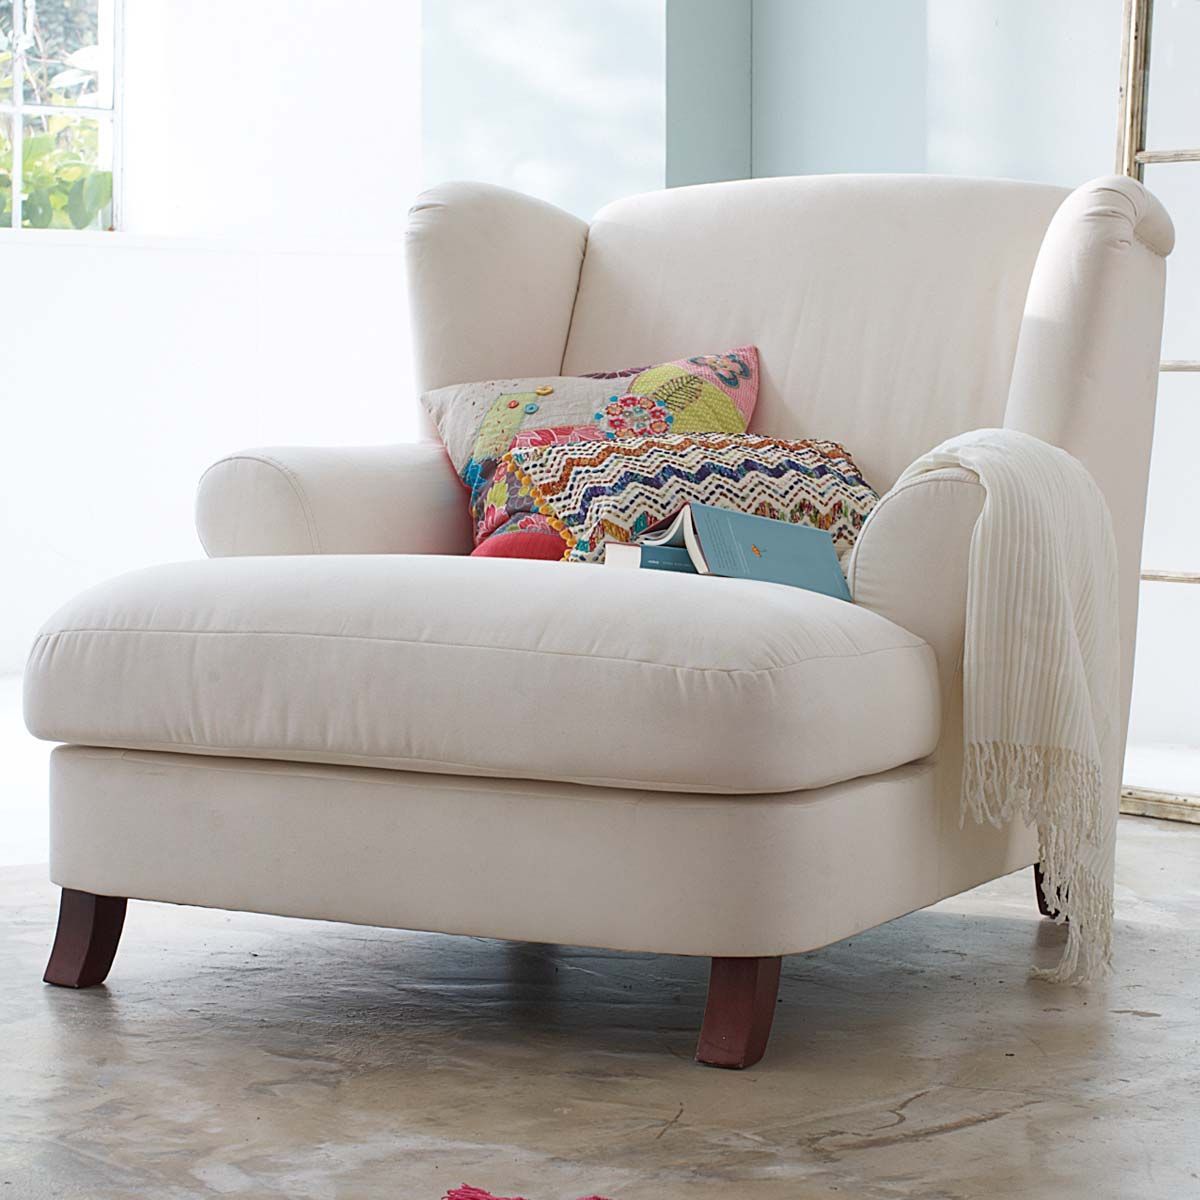 I Would Love To Have A Rocker Recliner Off White Chair, To Snuggle Regarding Alder Grande Ii Swivel Chairs (View 20 of 20)